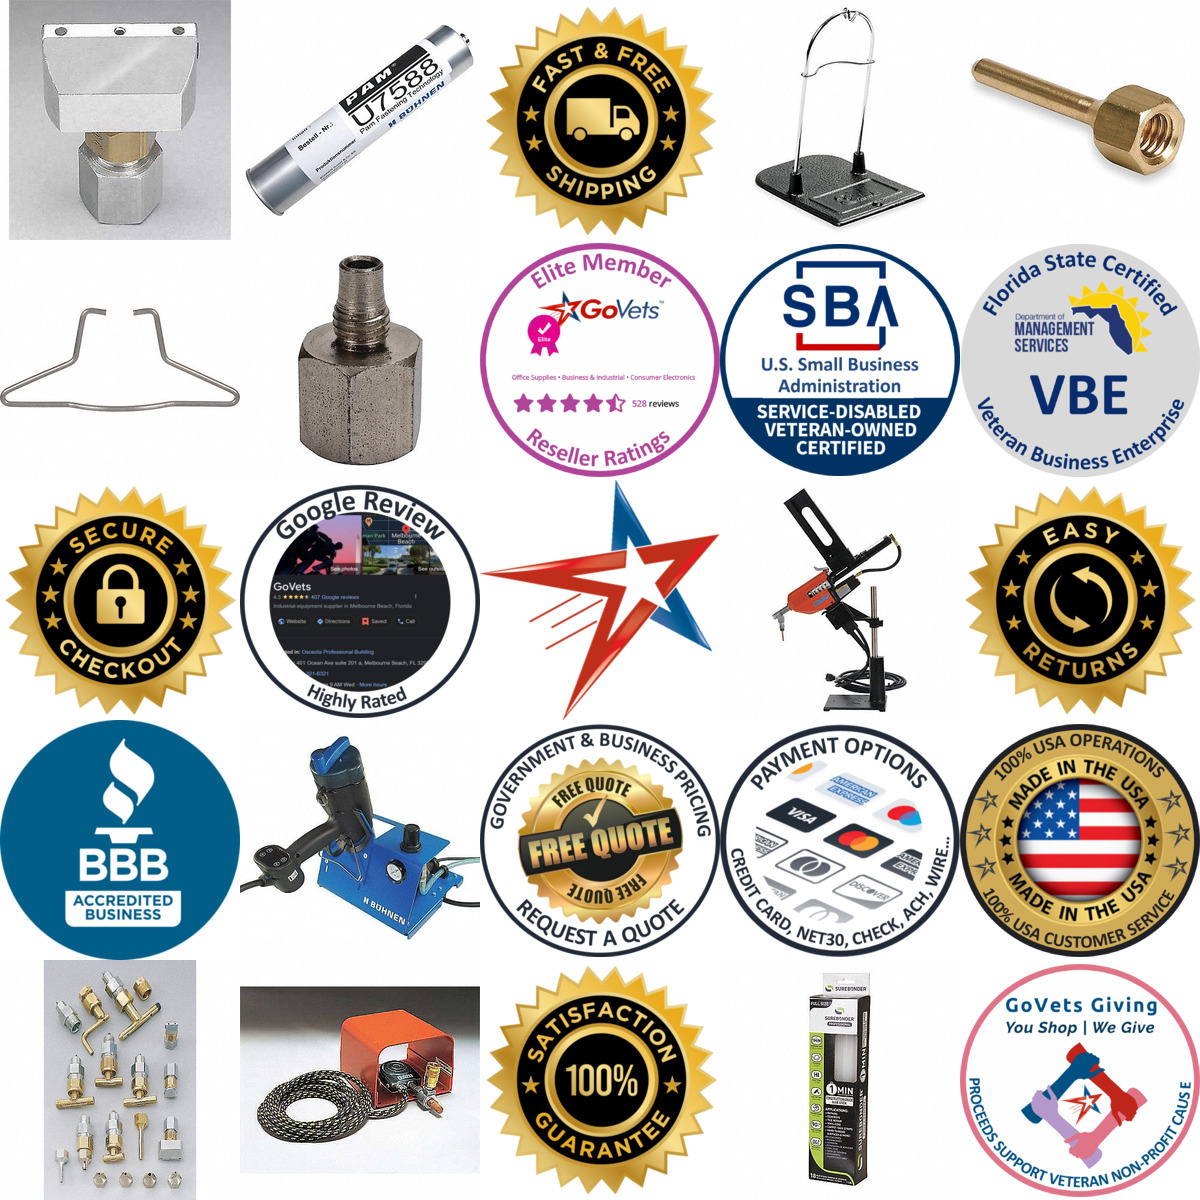 A selection of Hot Melt Glue Gun Parts and Accessories products on GoVets